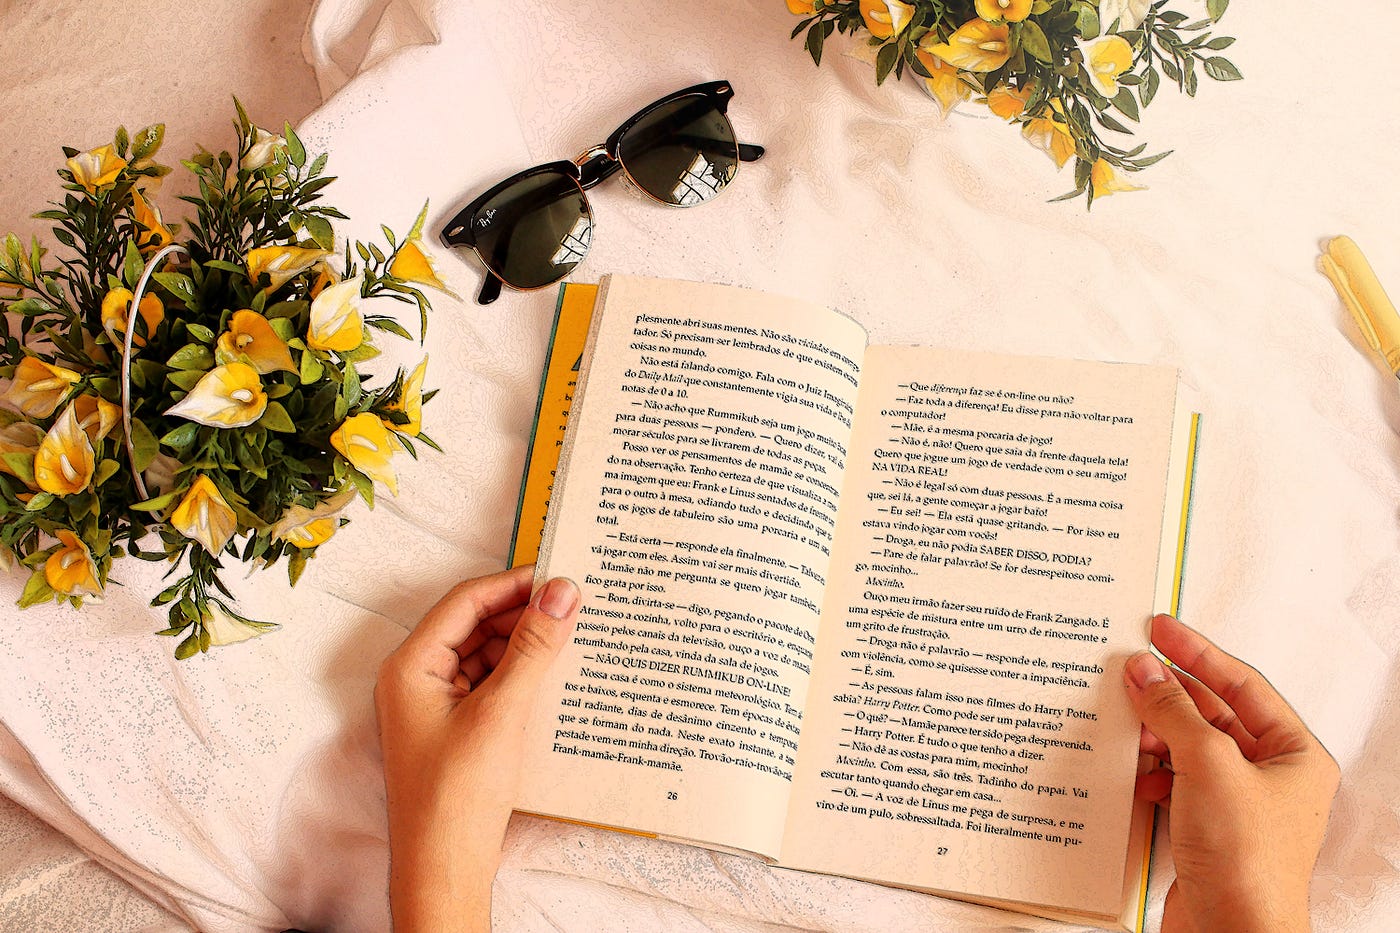 Open book on a table with yellow flowers and a pair of sunglasses.